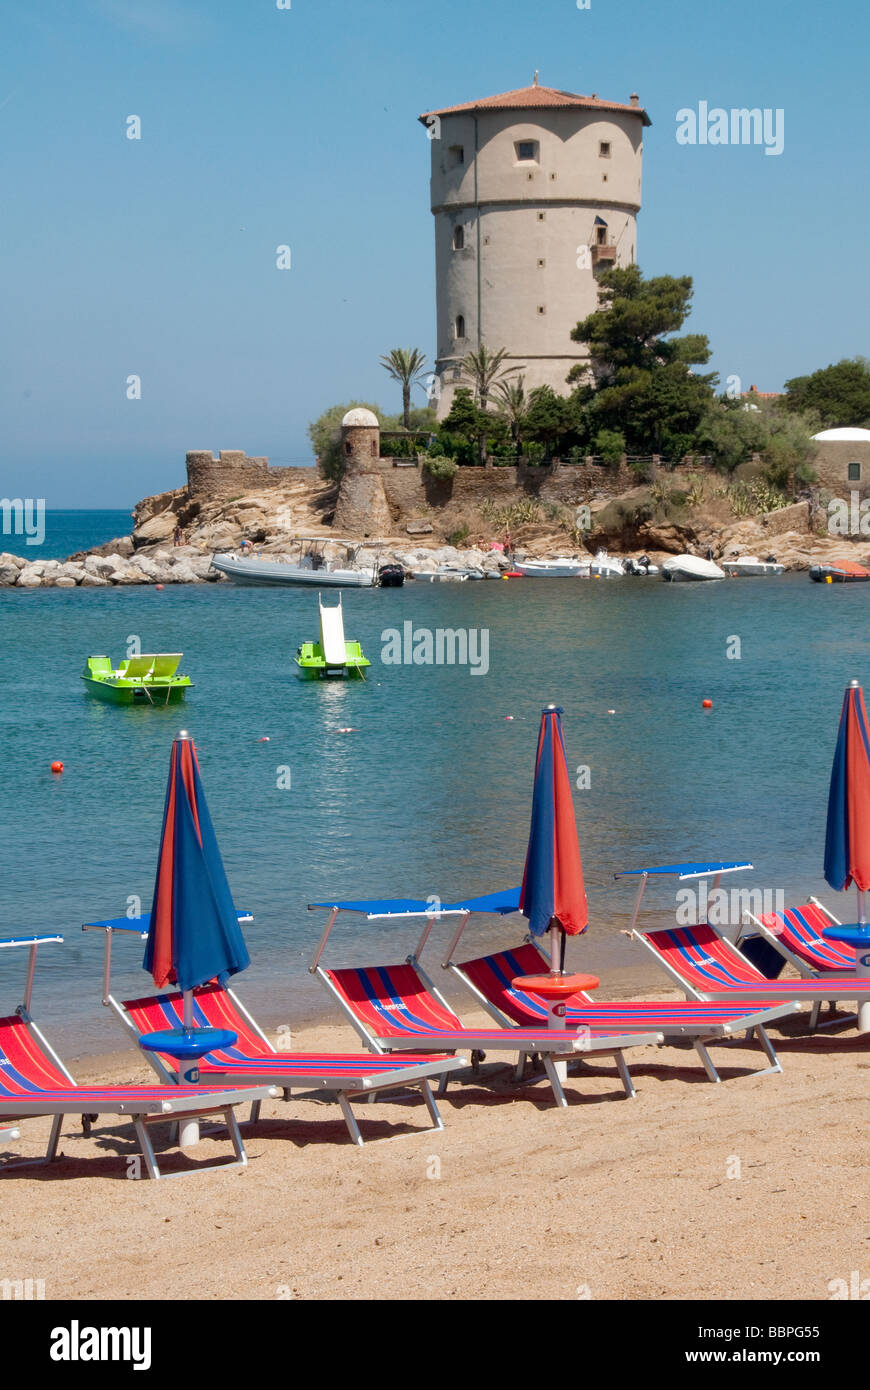 Umbrellas and sunbeds at Giglio Campese the main beach on the Island of Giglio or Isola del Giglio off the Tuscan coast Stock Photo